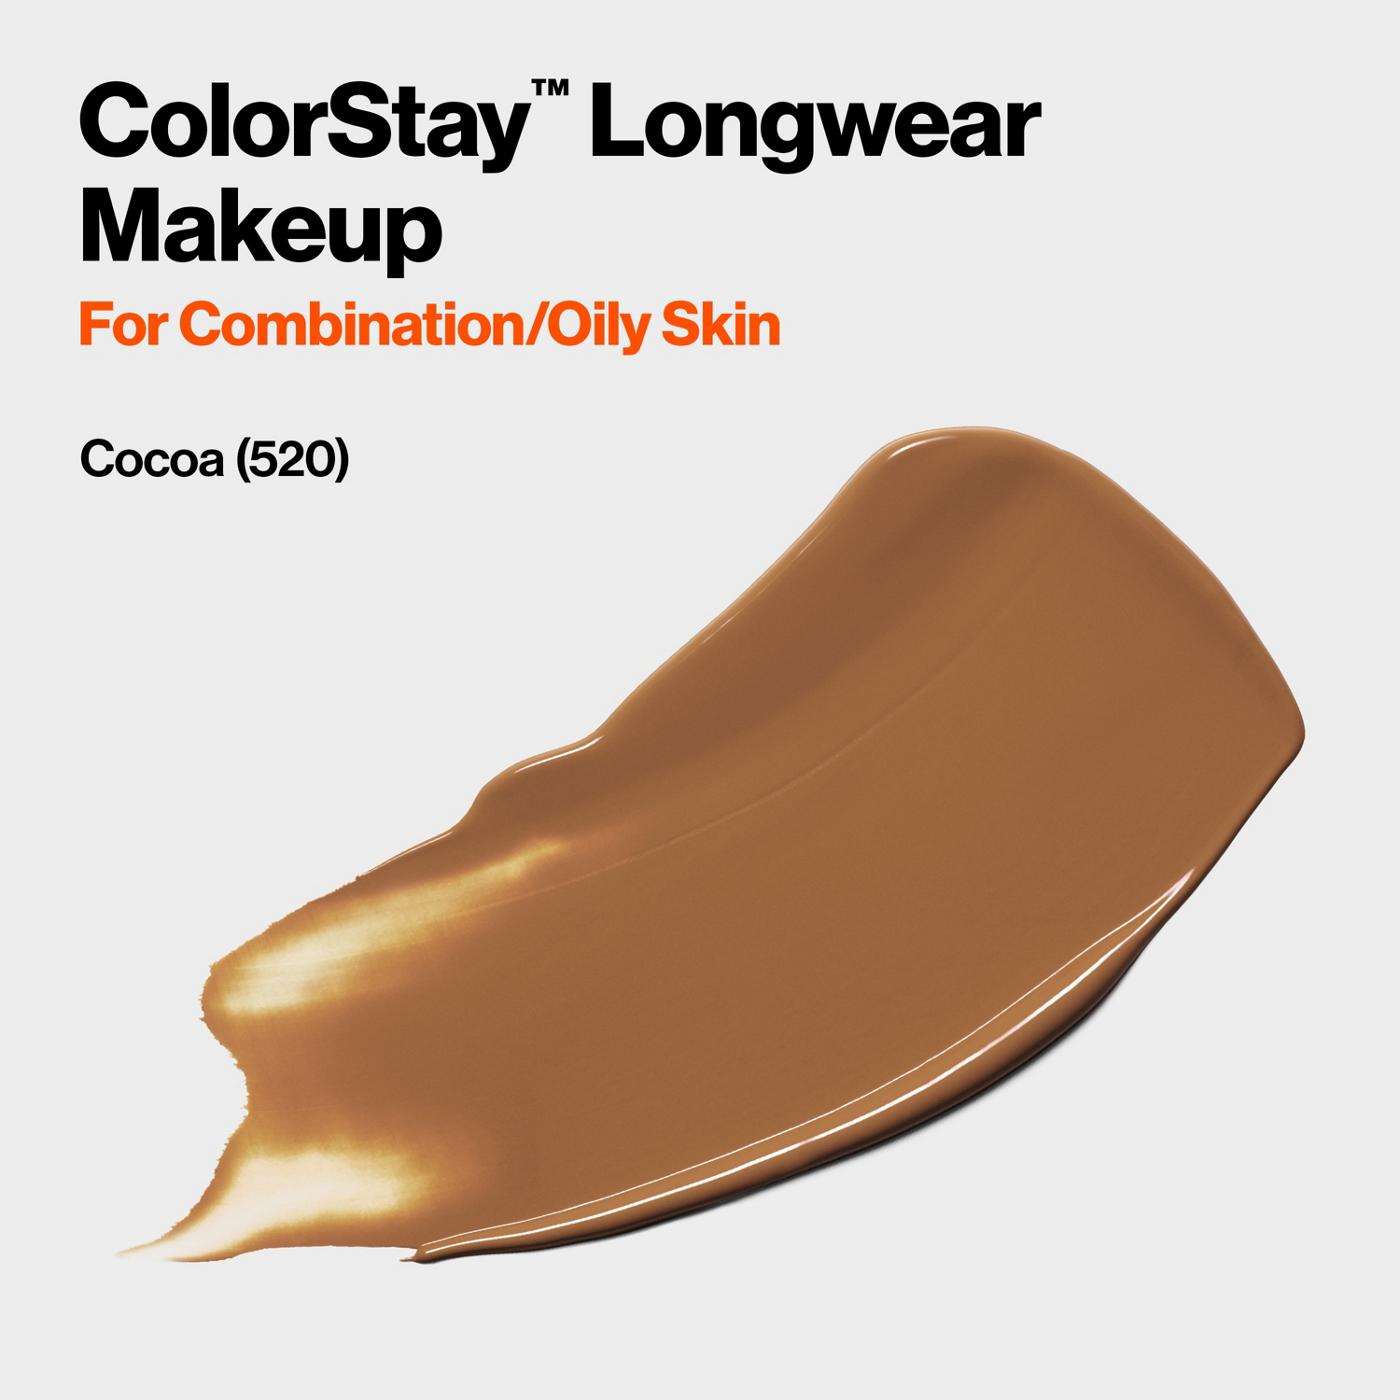 Revlon ColorStay Longwear Makeup Foundation - Cocoa Cacao; image 5 of 6